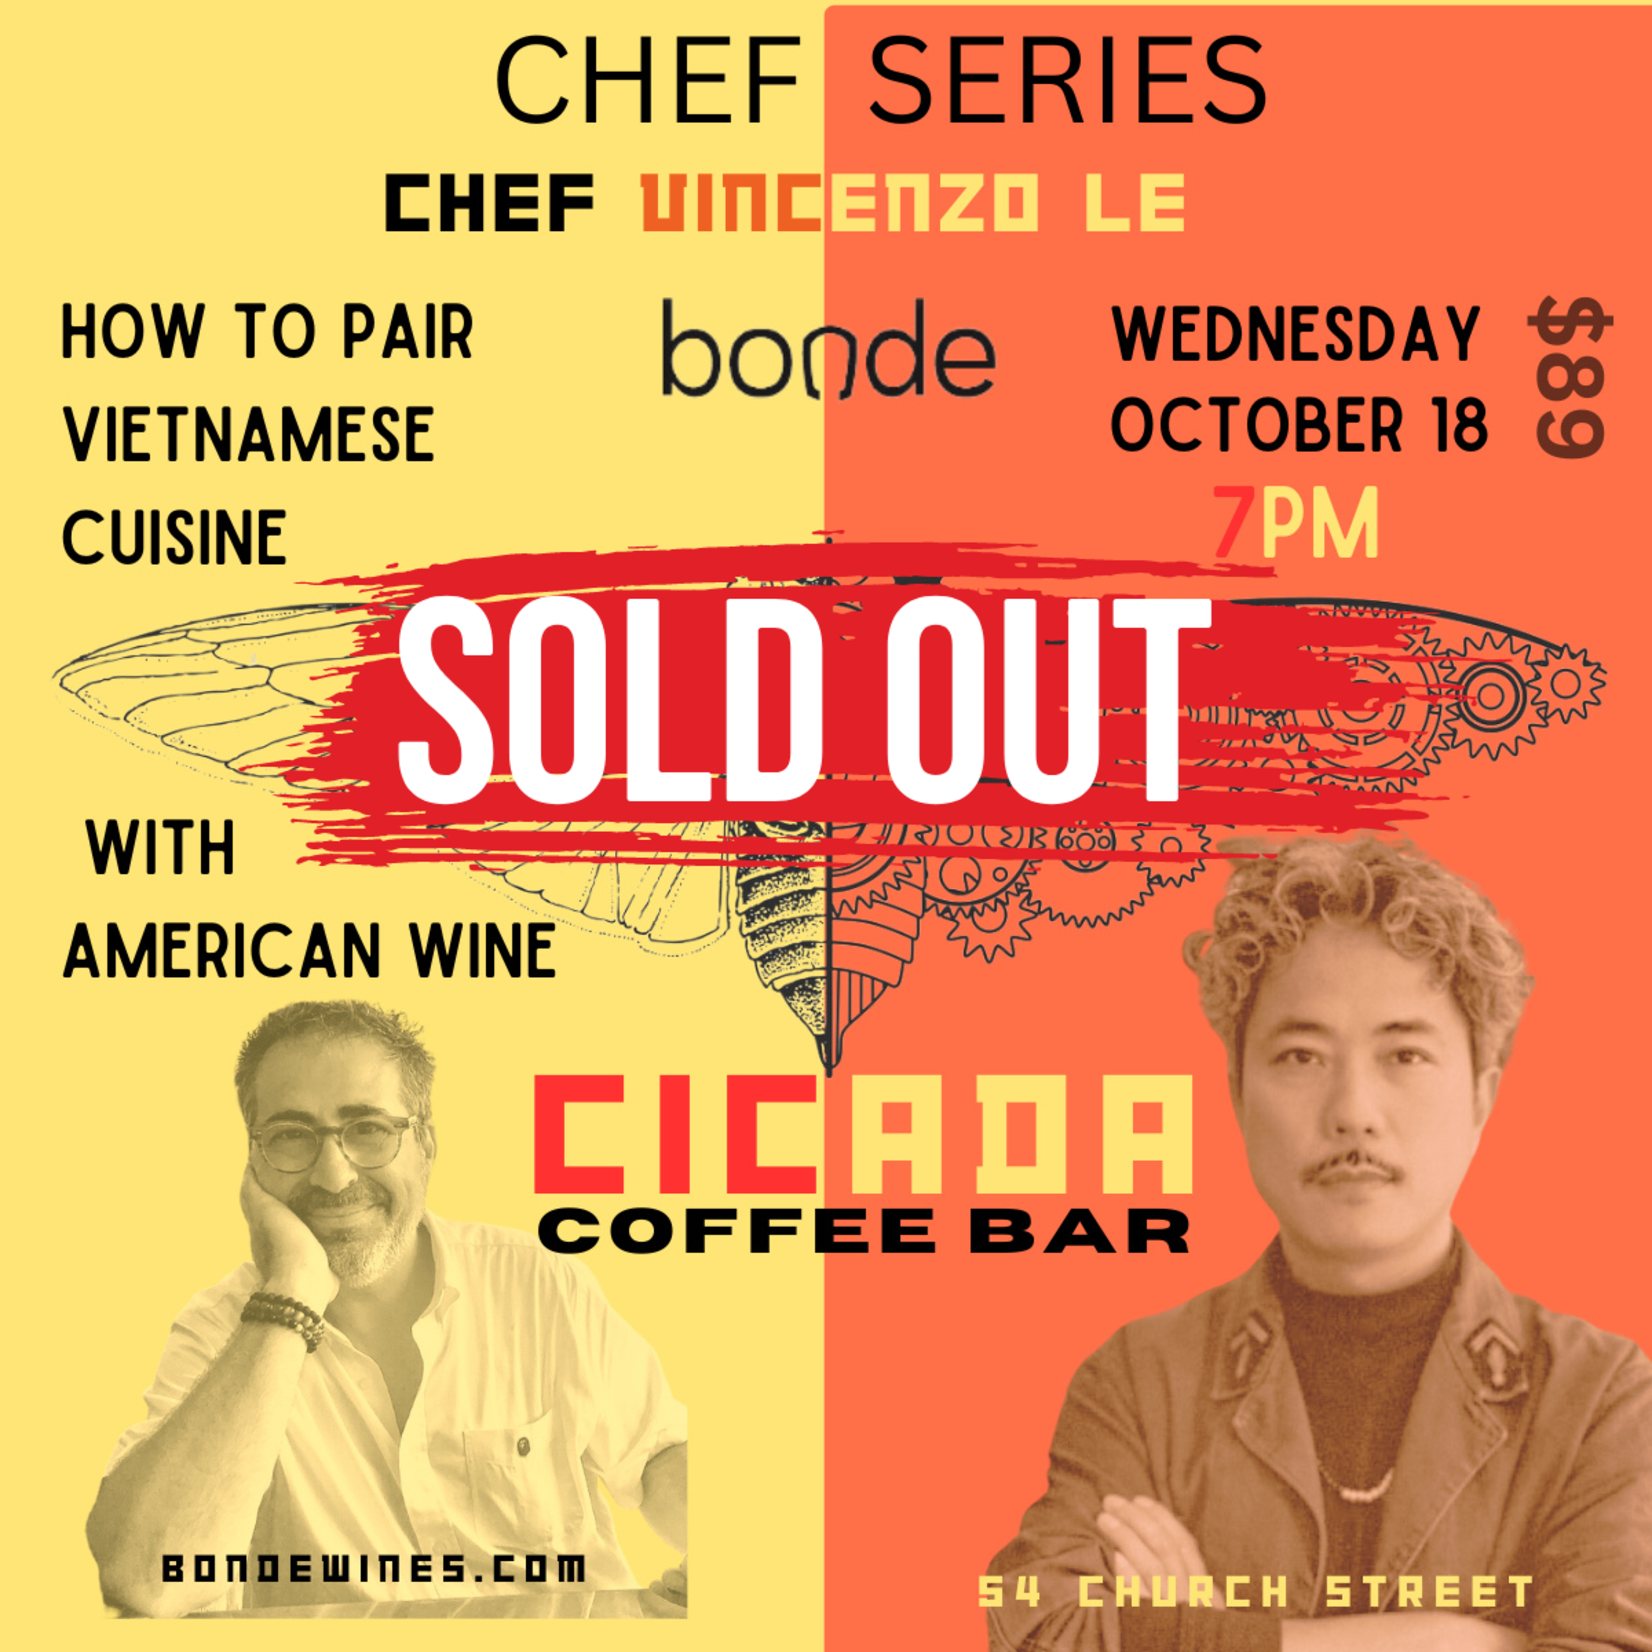 Chef Series: Vincenzo Le of Cicada Coffee Bar - Pairing Vietnamese Cuisine with Wine - Wednesday October 18, 7PM